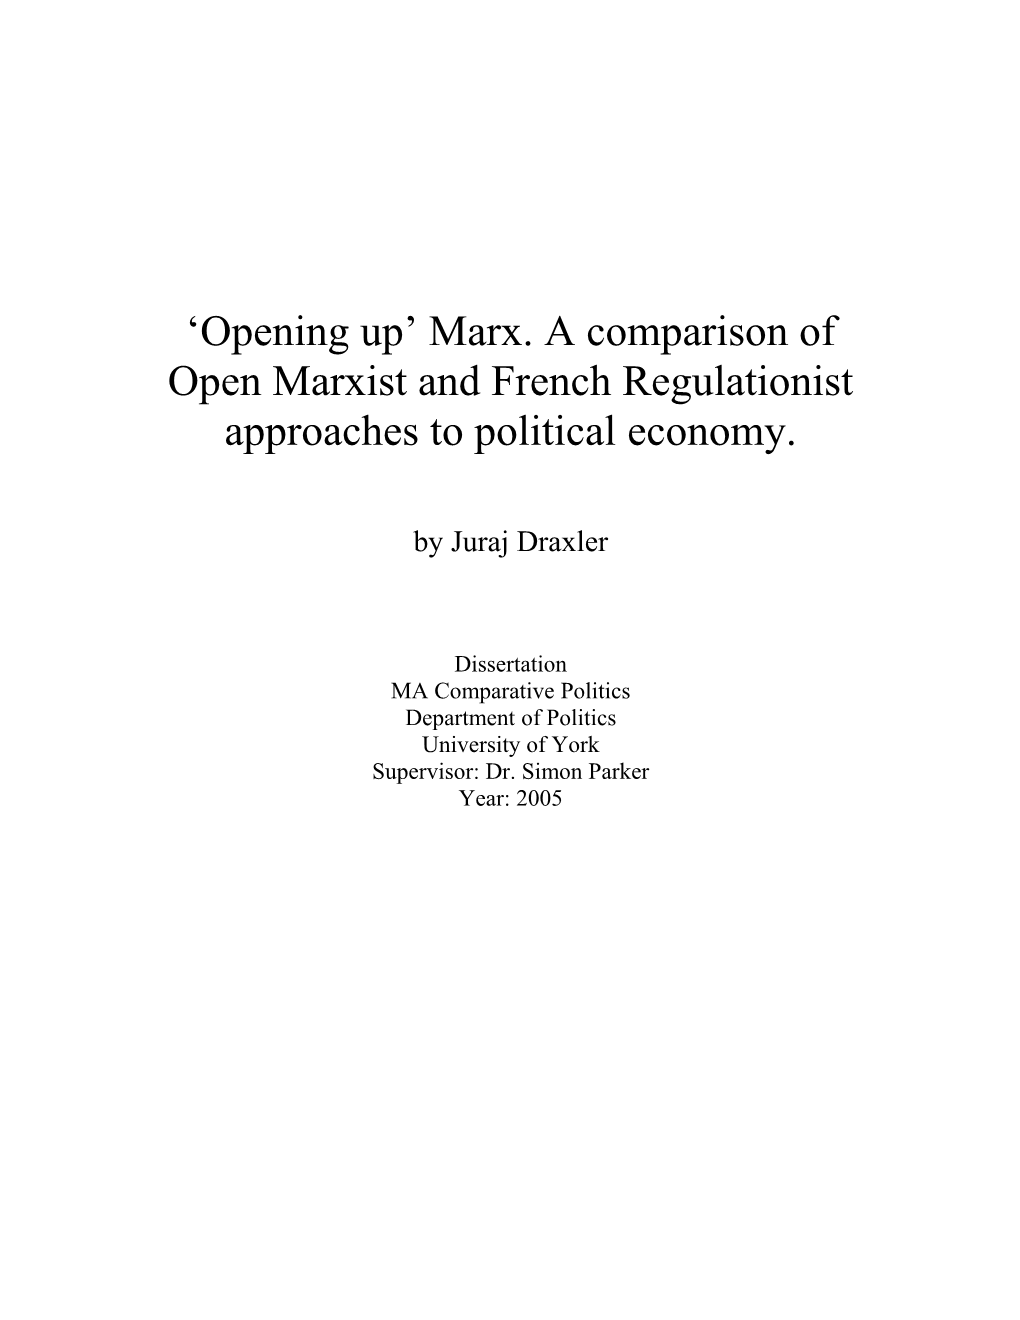 Opening up Marx. a Comparison of Open Marxist and French Regulationist Approaches to Political